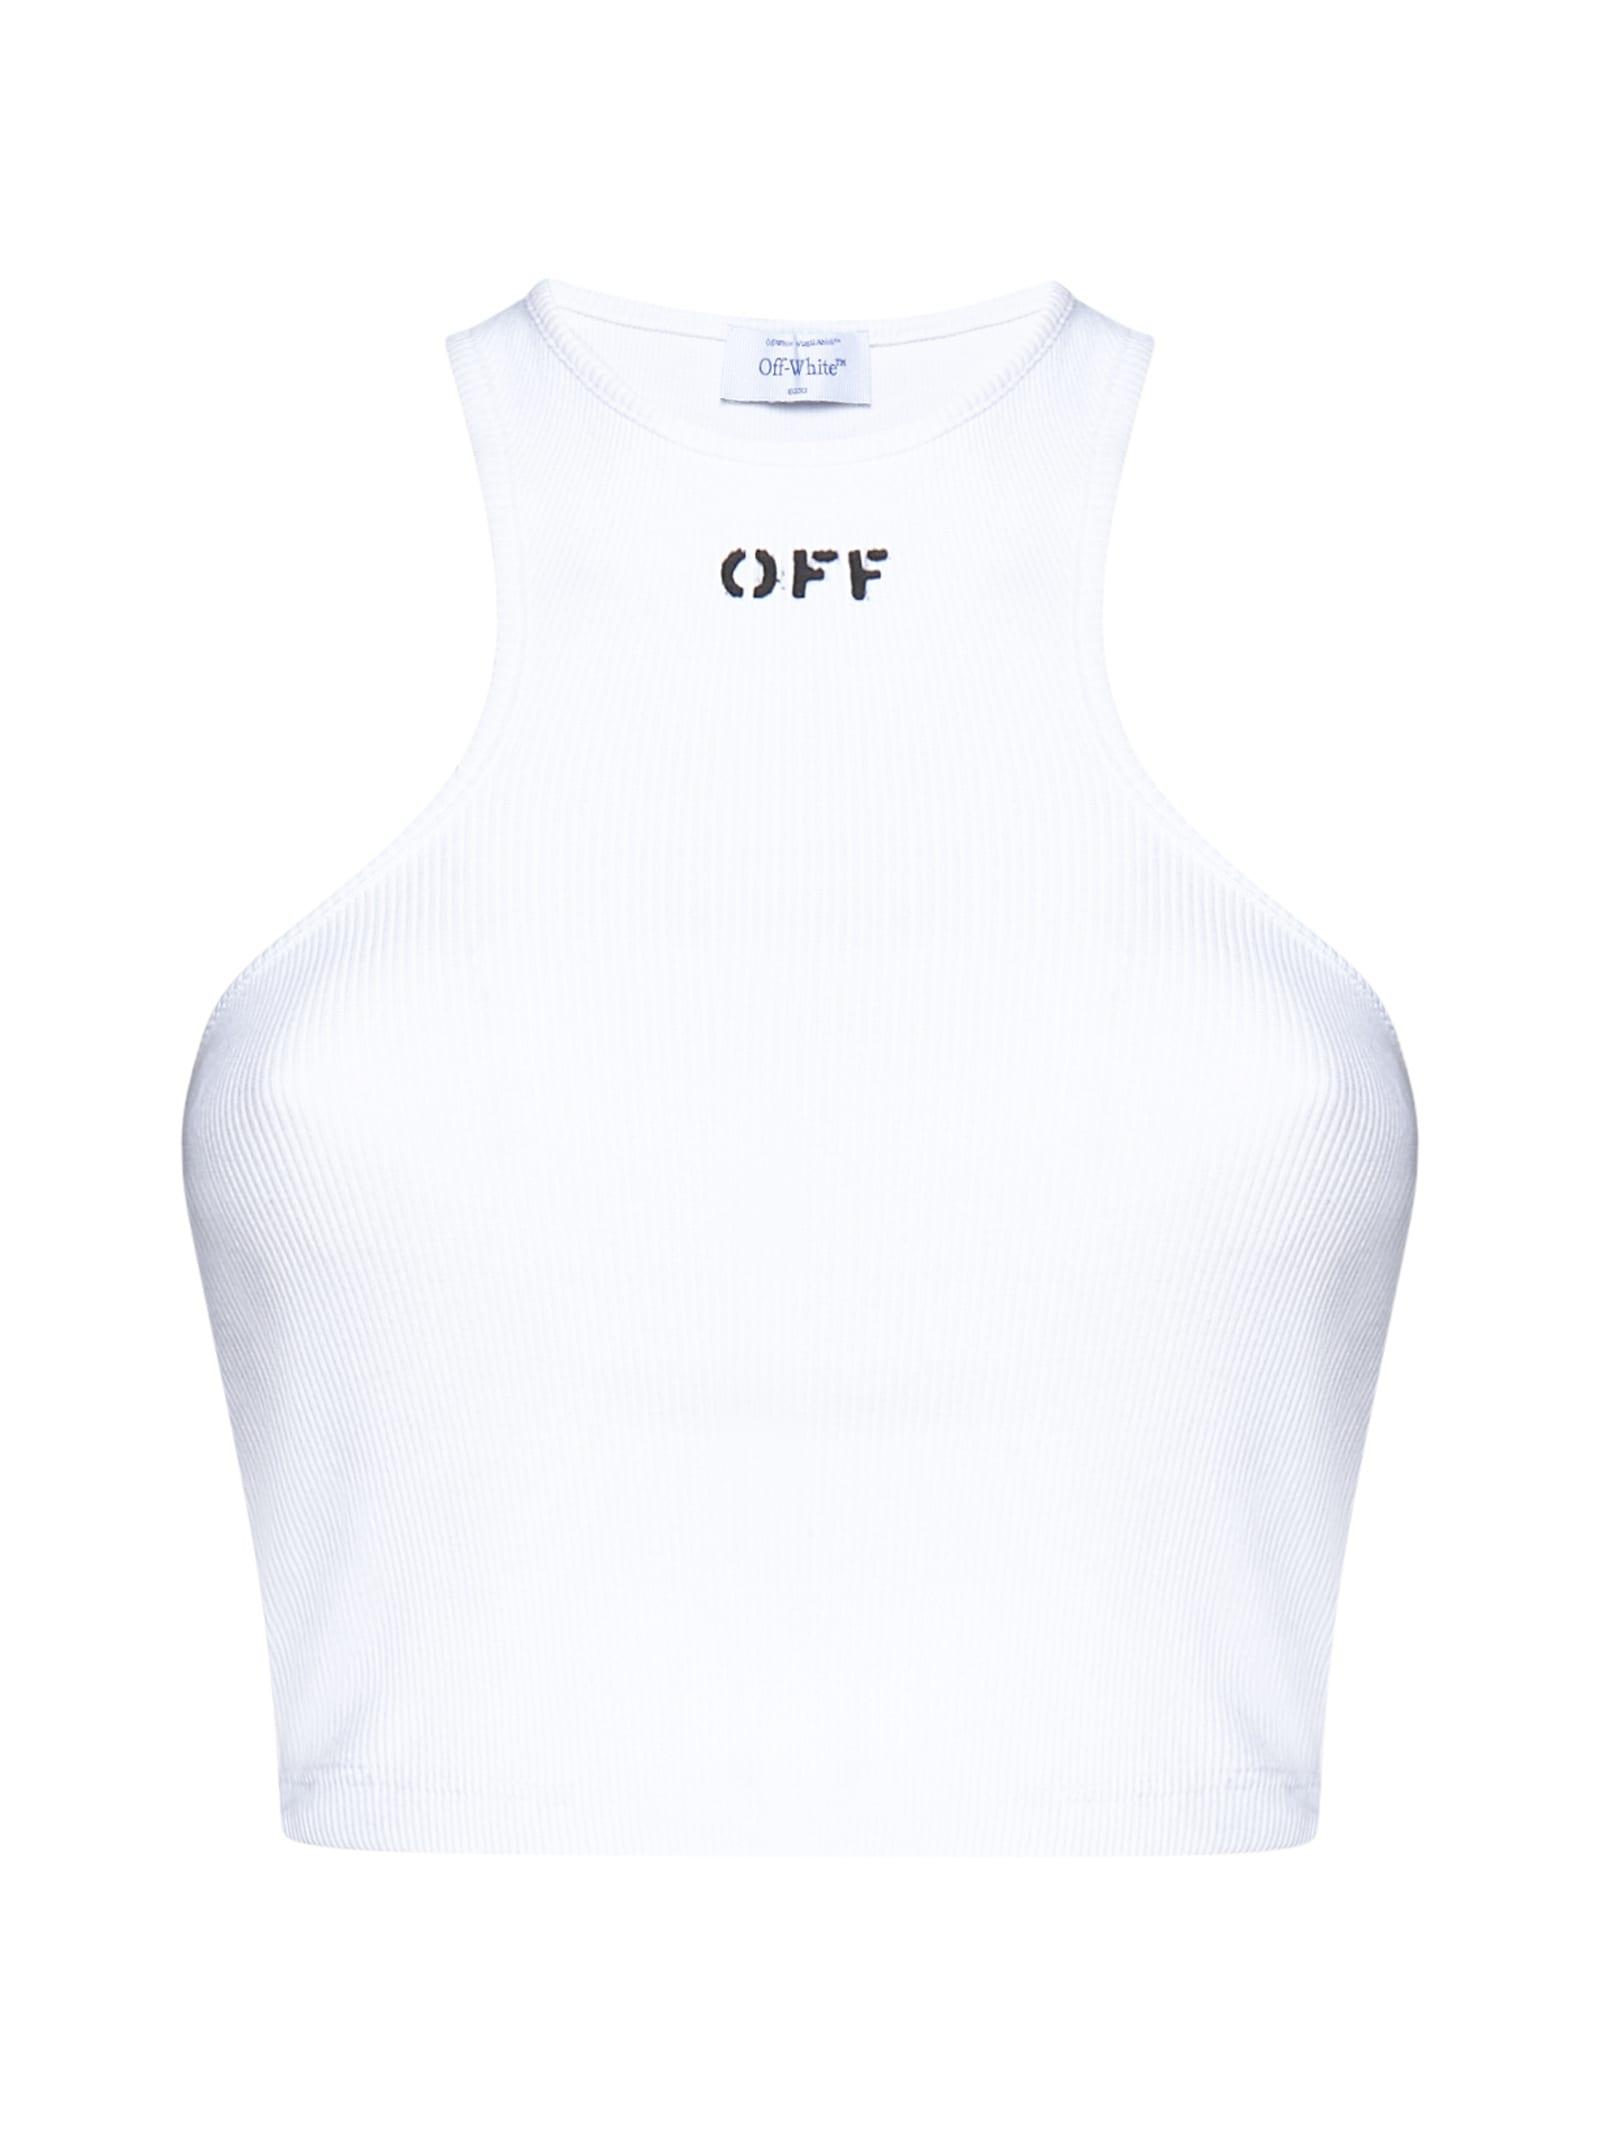 Off-White c/o Virgil Abloh Off Top in White | Lyst